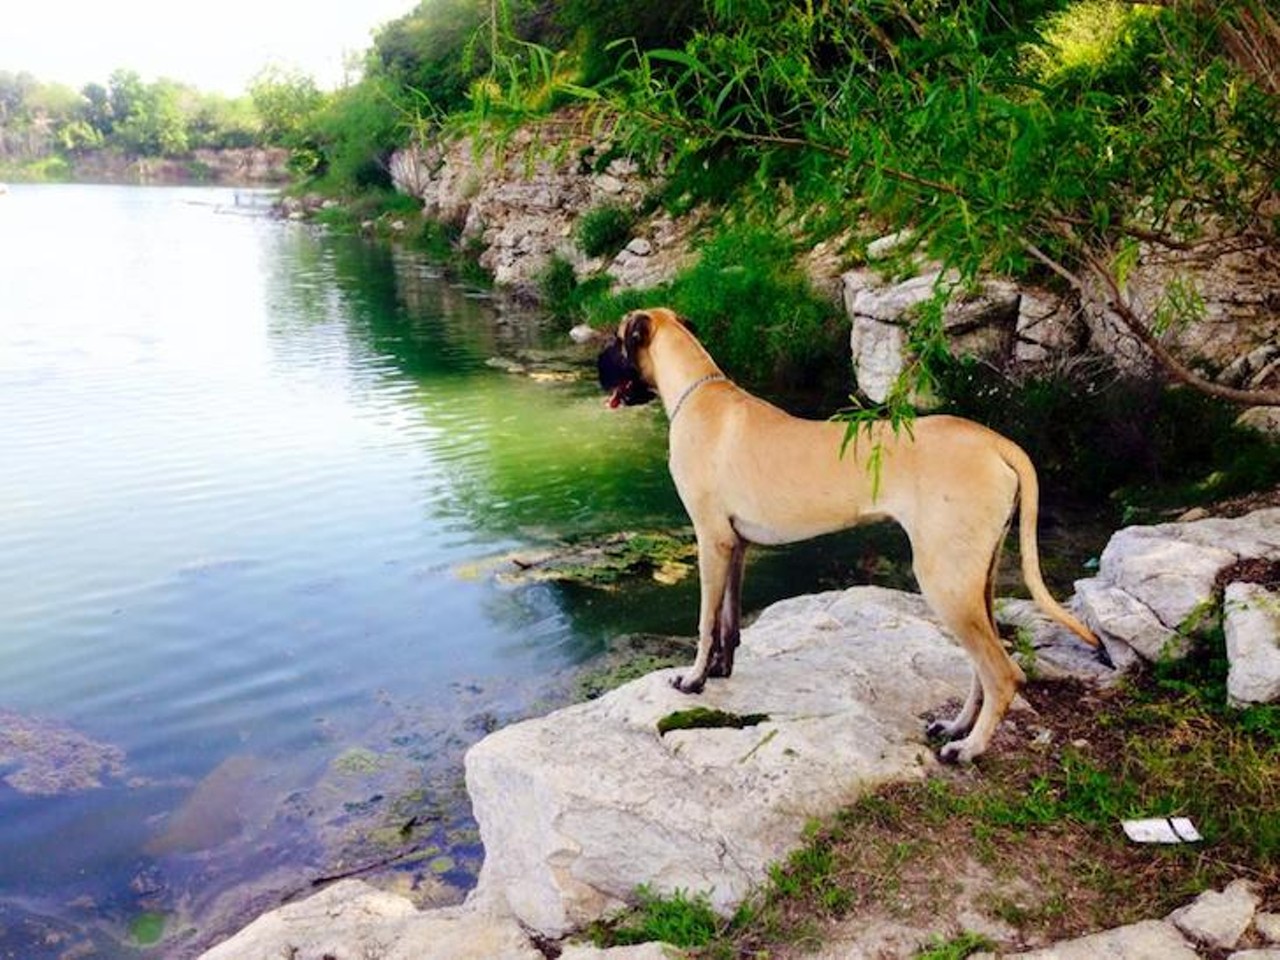 Tom Slick Park  
7400 Texas 151 Access Road, (210) 207-7275, sanantonio.gov
Explore the outdoors with your four-legged friend at Tom Slick Park, a local standby for fresh air, sunshine and exercise. 
Photo via Facebook (Diesel Lynch)